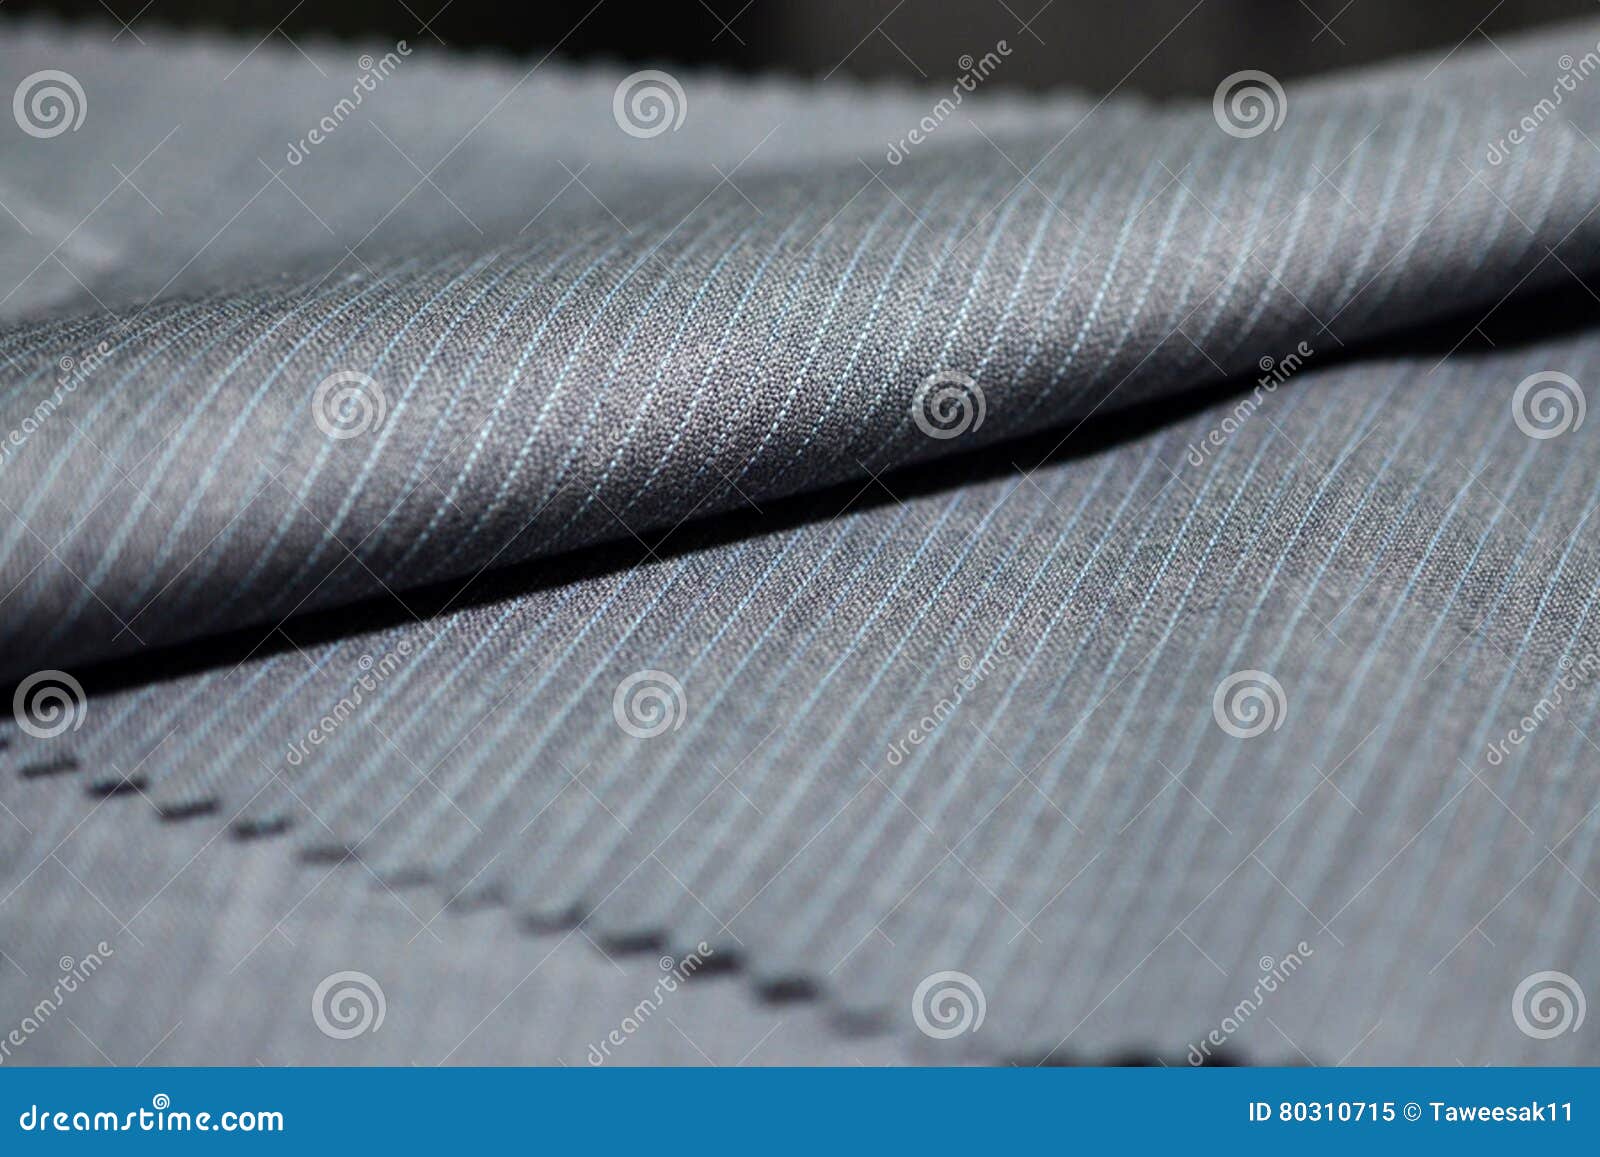 Close Up Roll Gary with Blue Line Fabric of Suit Stock Image - Image of ...